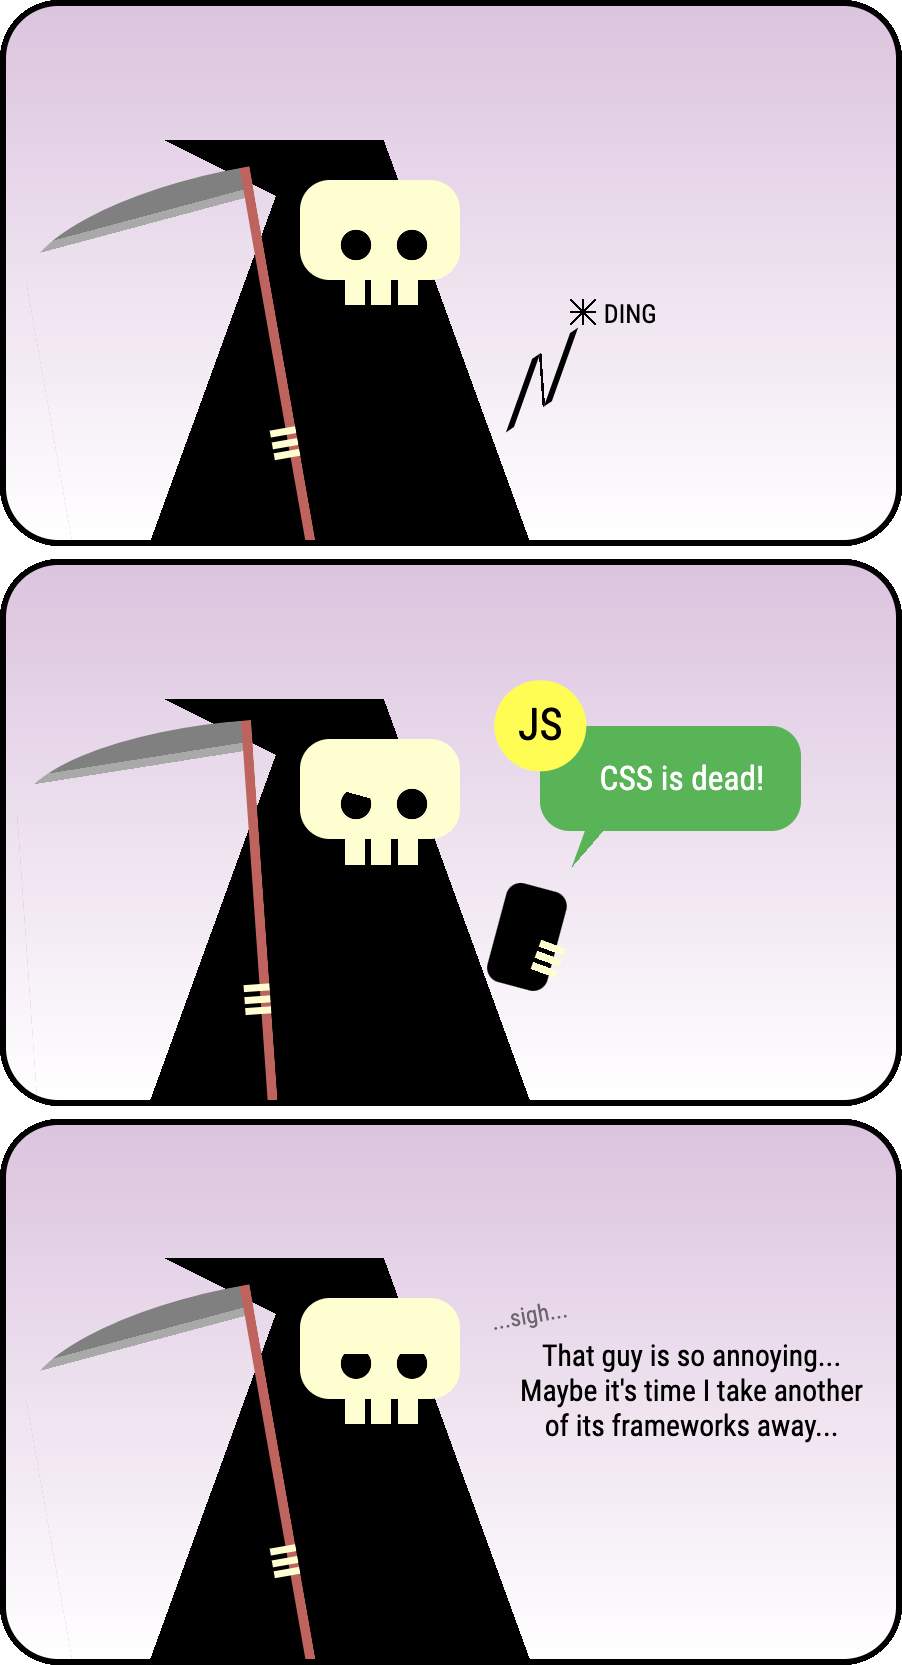 Cartoon in three panels: Death (a skeleton wearing a dark cloak with a smythe) receives a text message from JavaScript saying 'CSS is dead!' Disappointed, Death sighs: That guy is so annoying... Maybe it's time I take another of its frameworks away...